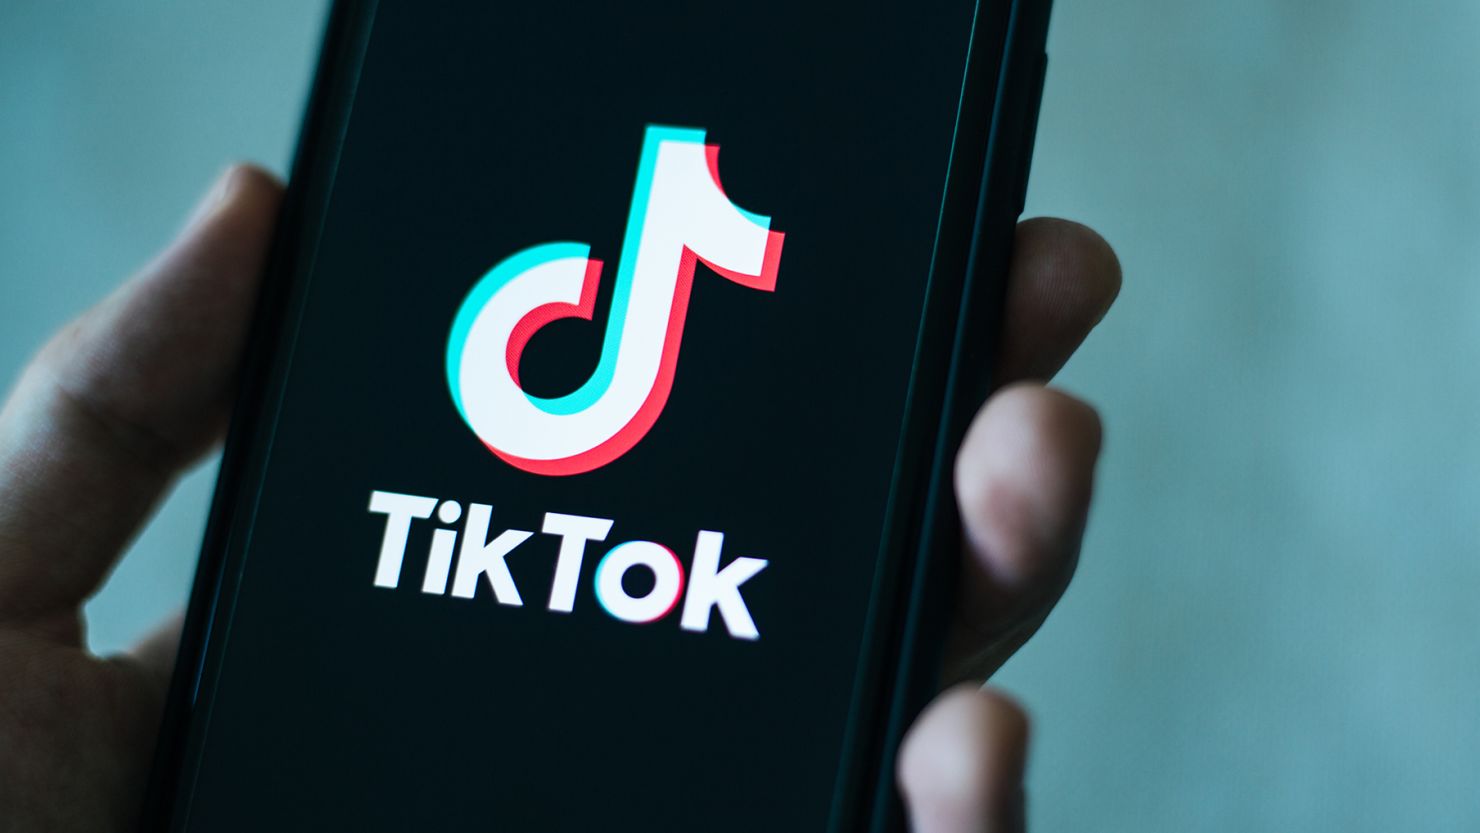 Agencies have 30 days to ban TikTok on government devices, White House ...